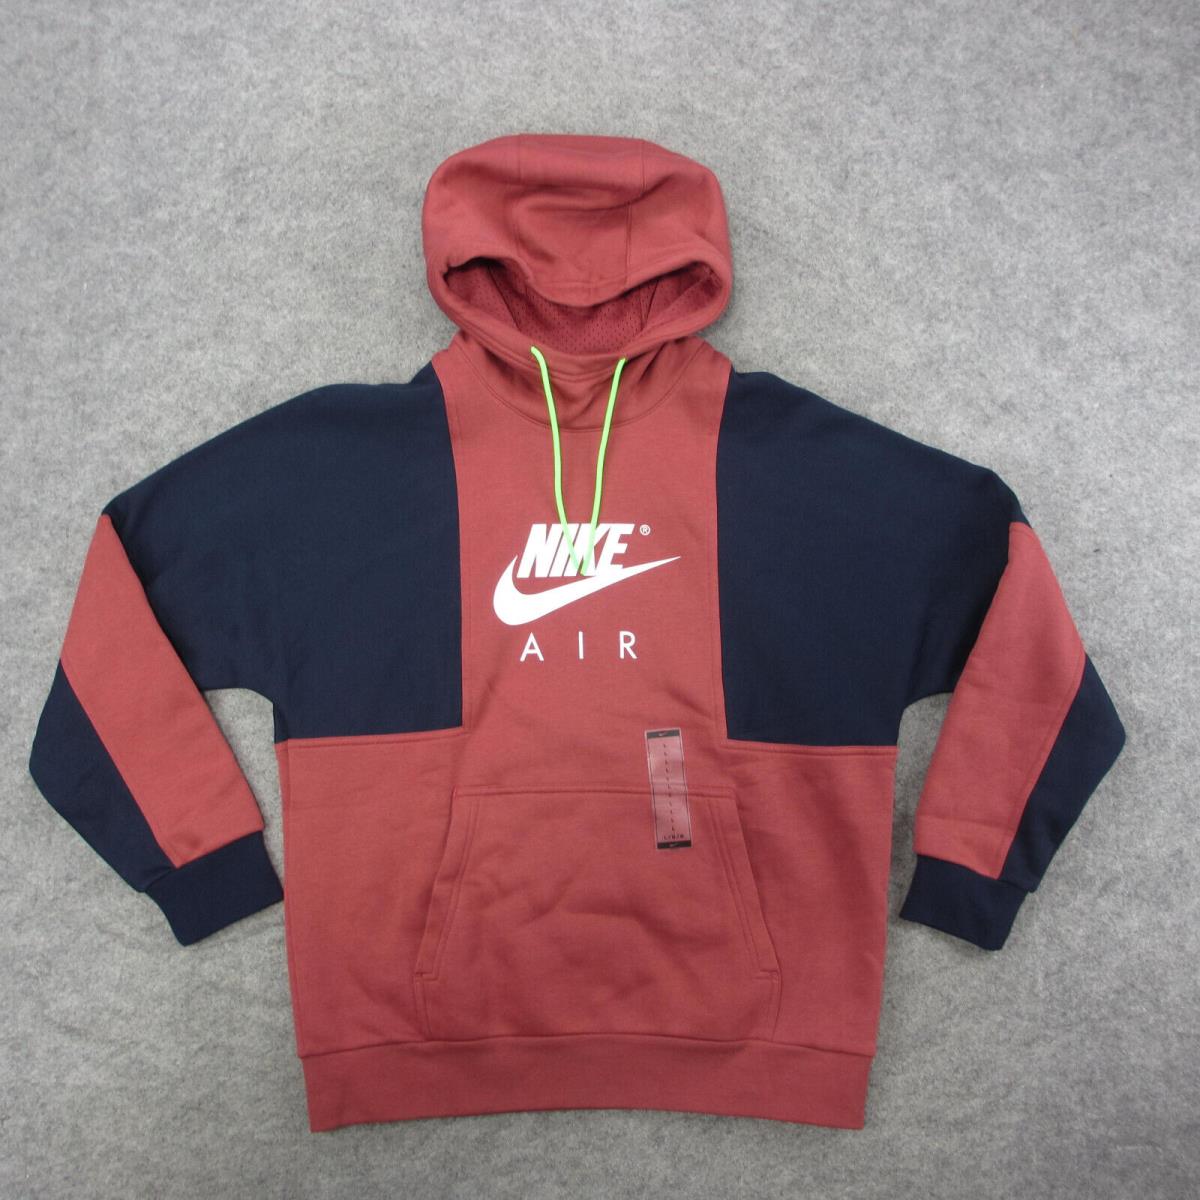 Nike Air Get Over Your Fear Of Heights Hoodie Size L Red Hooded Sweatshirt